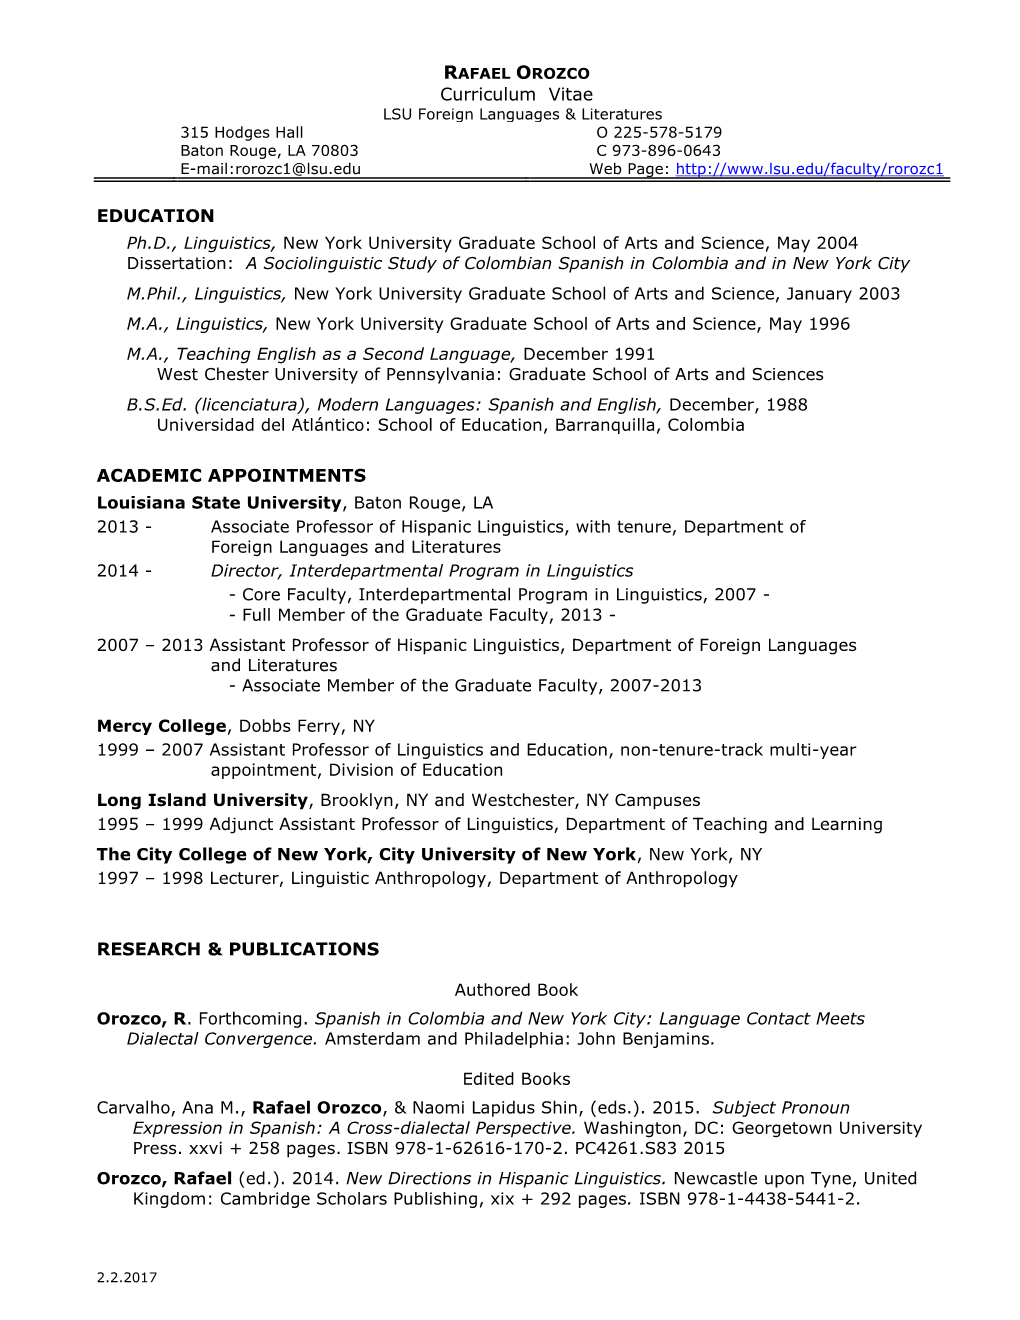 Curriculum Vitae EDUCATION ACADEMIC APPOINTMENTS